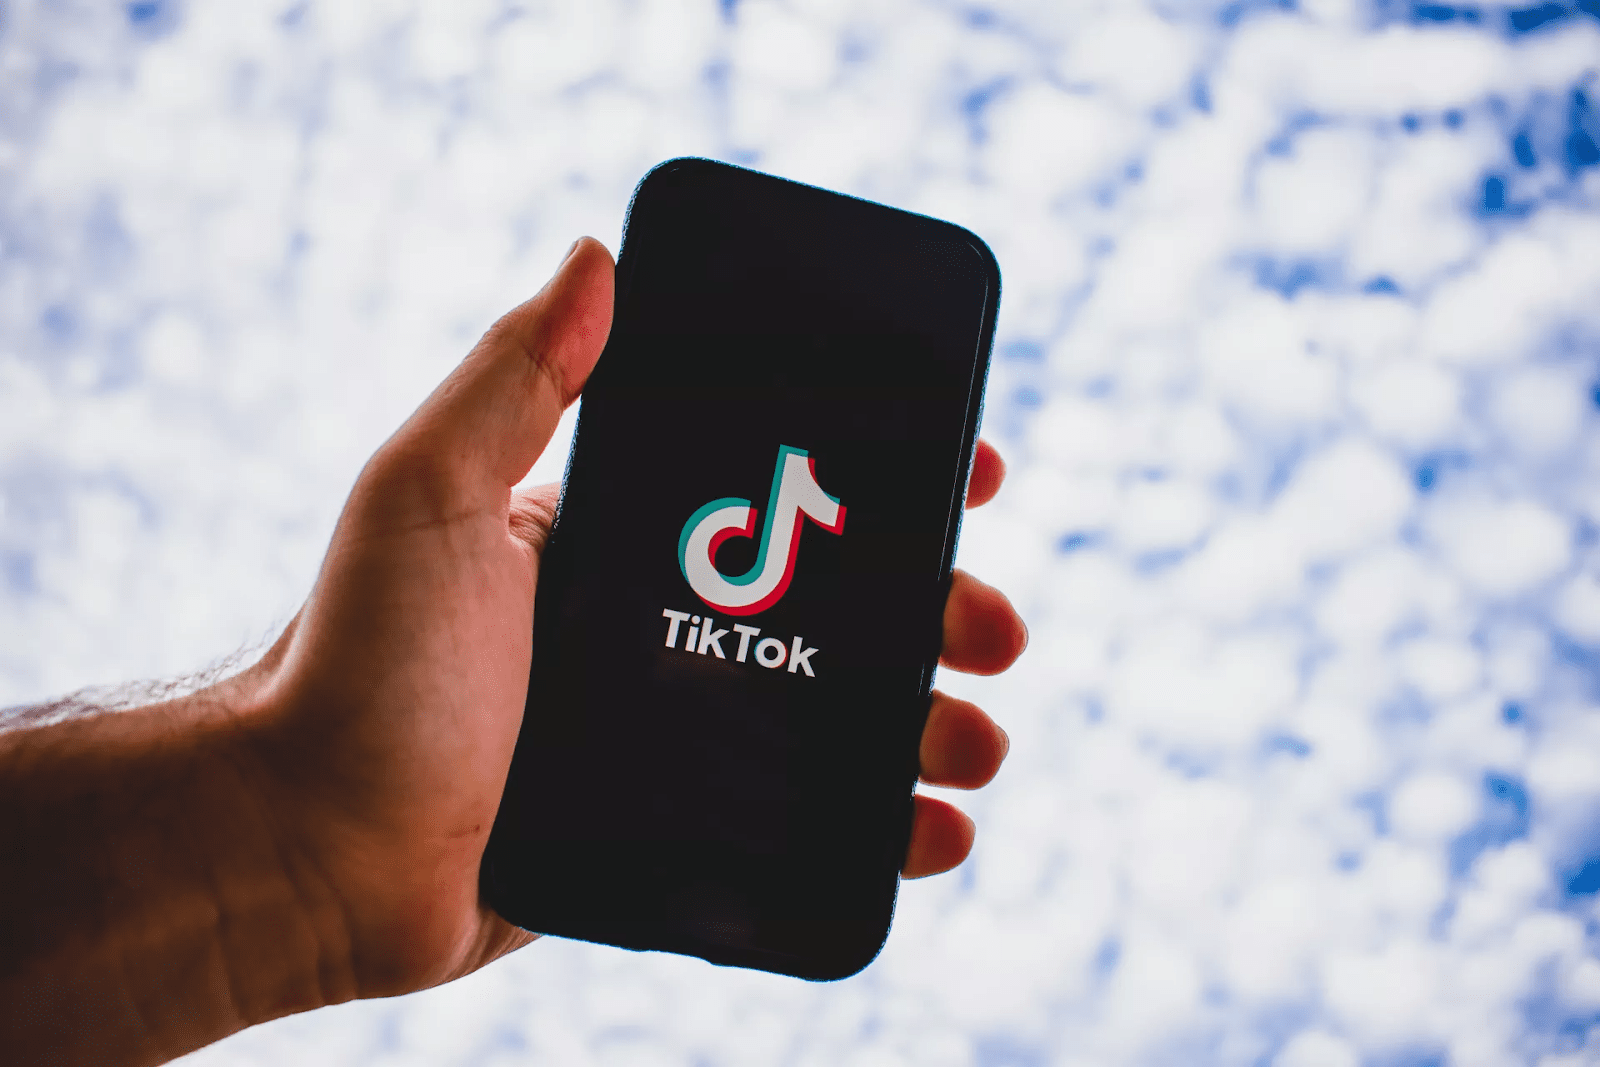 If you use TikTok, you've probably seen some adorably sweet videos people post of the things they have in their bedrooms